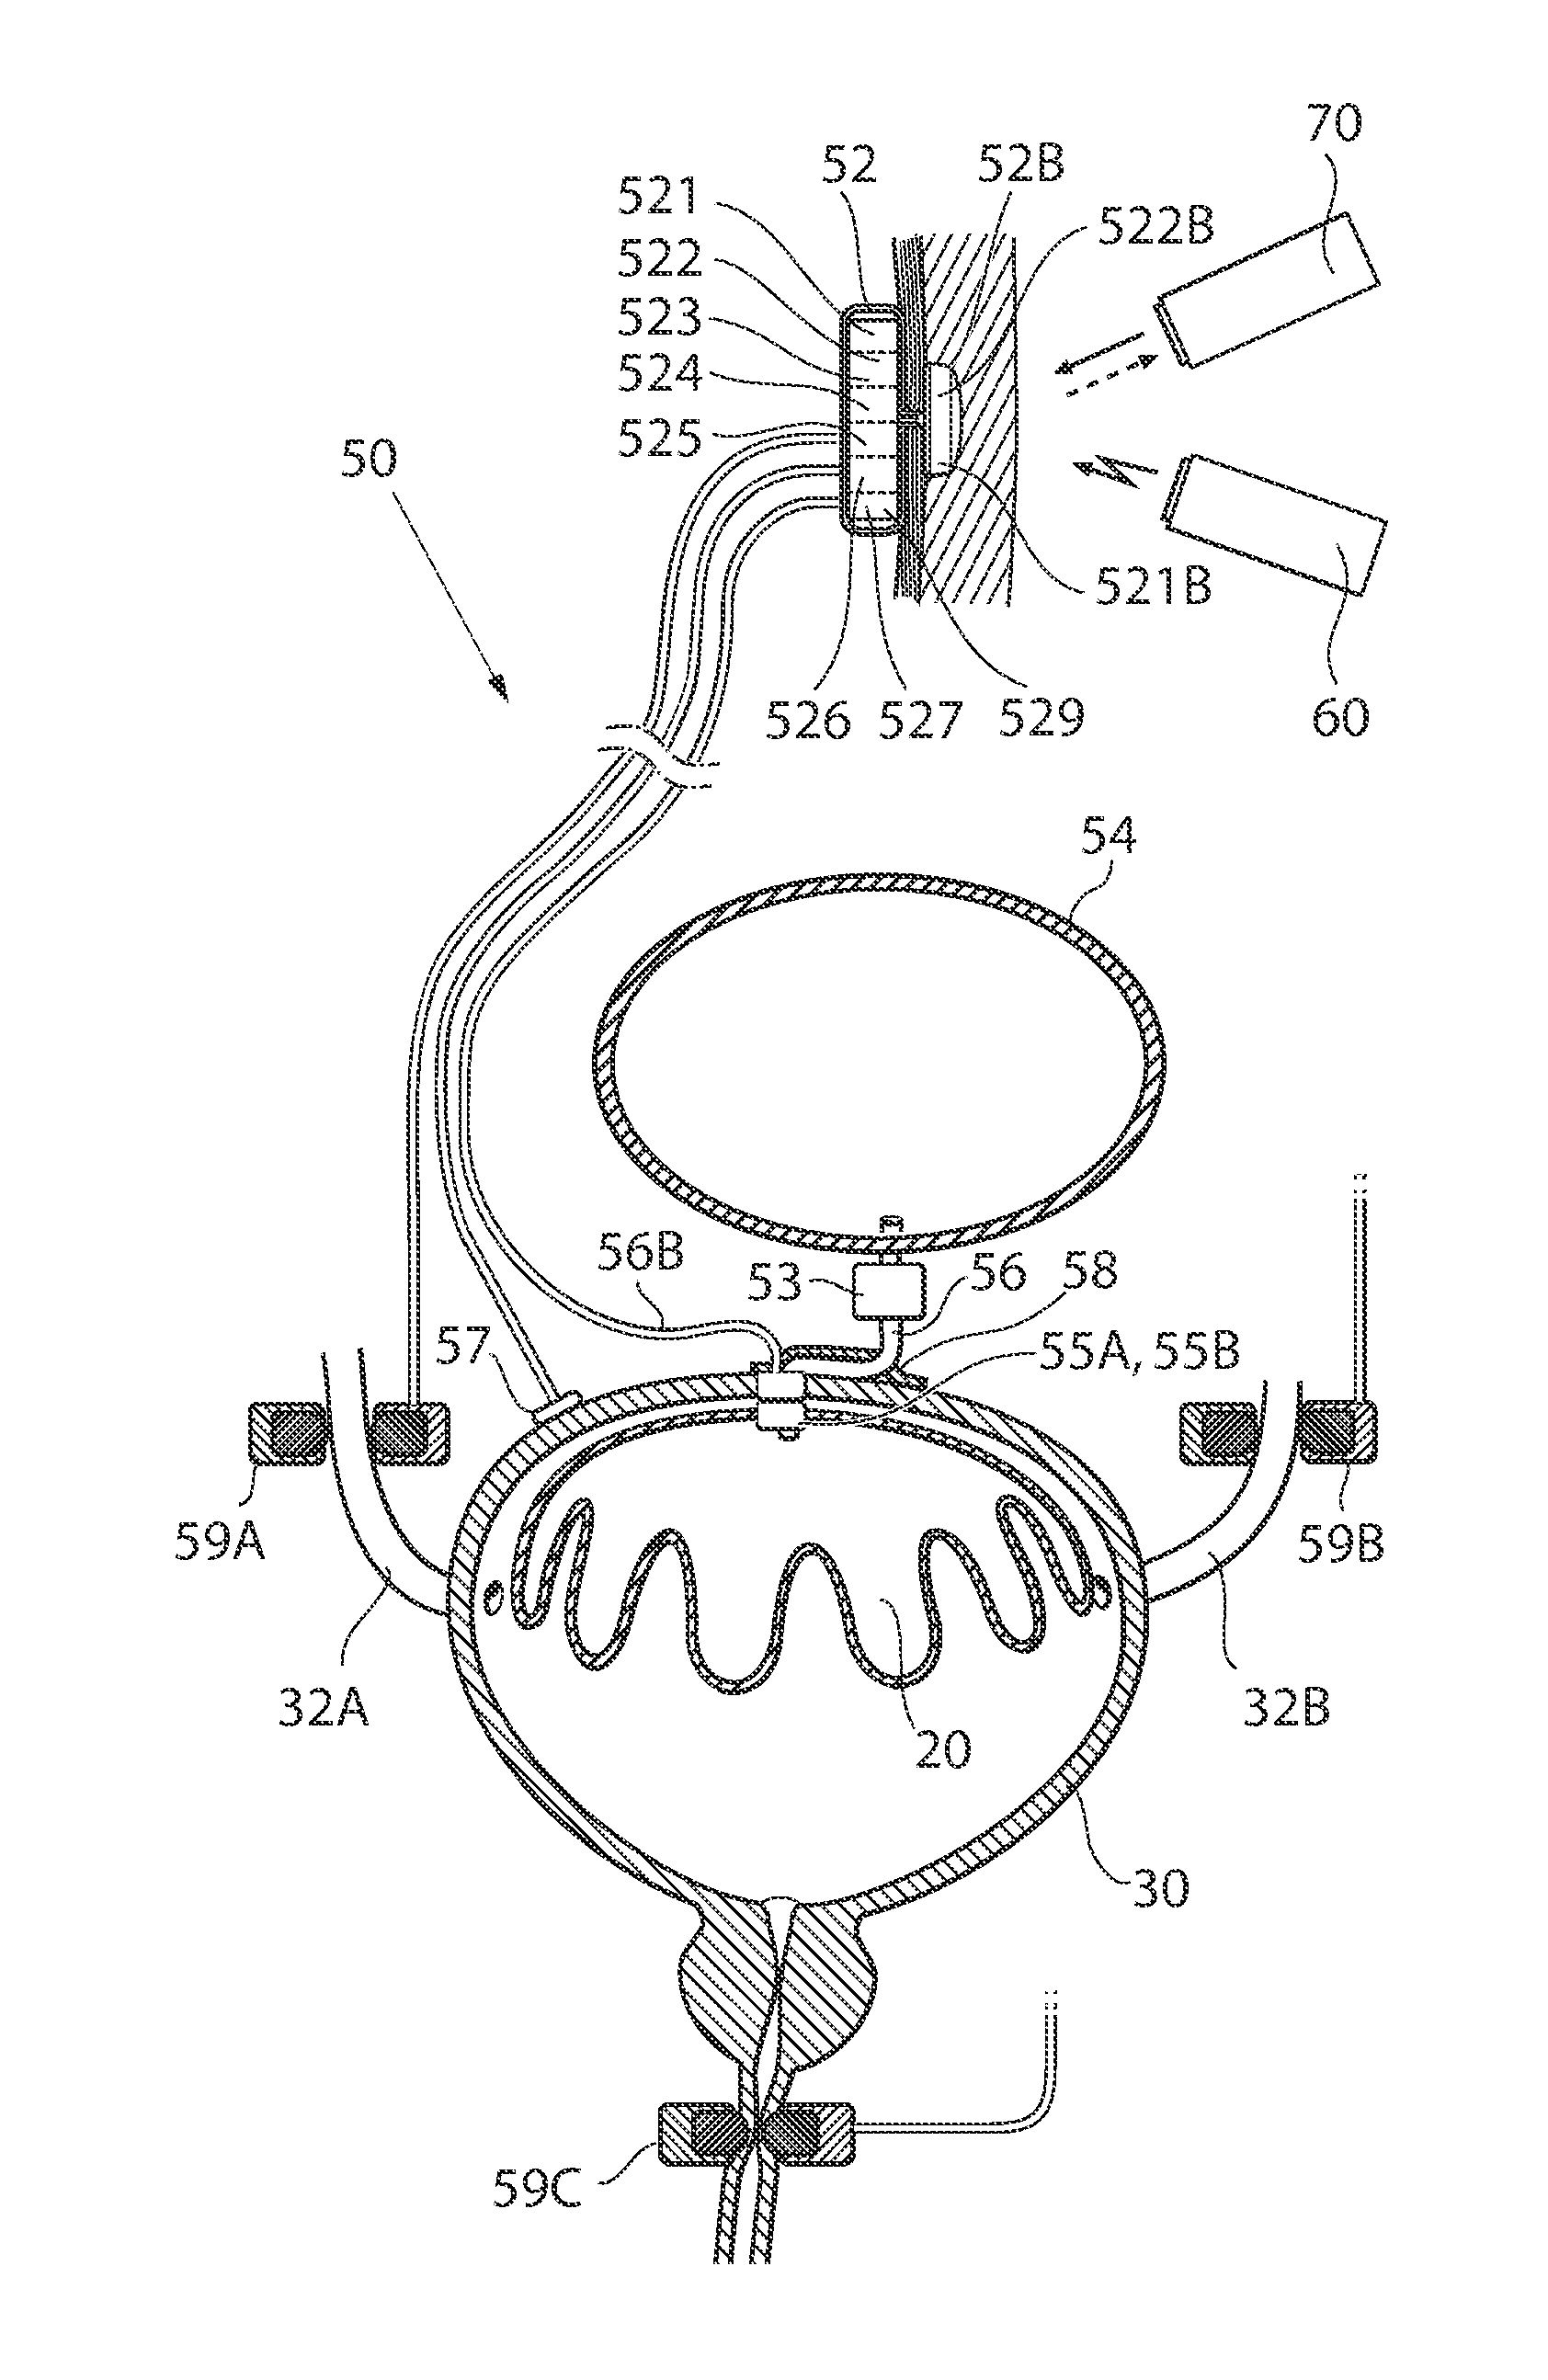 Implantable device for internal urinary control